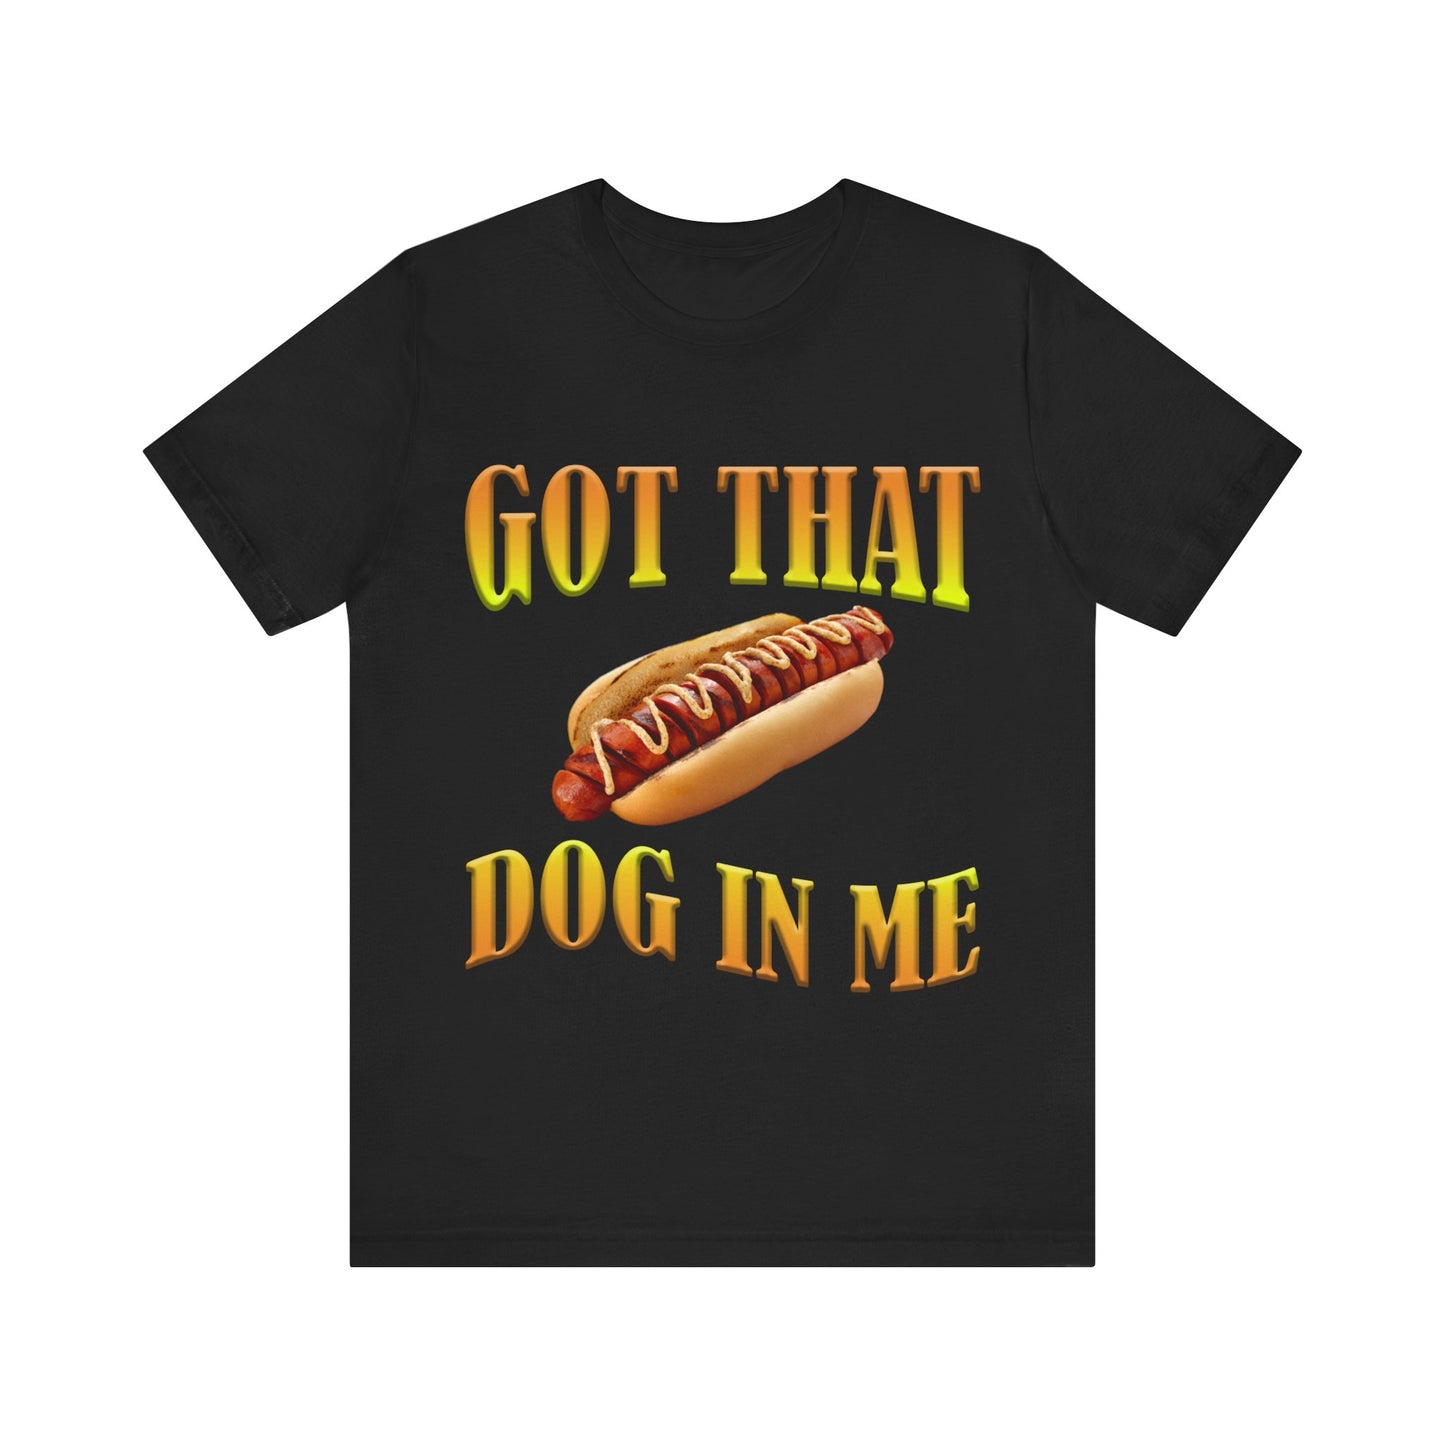 Got that dog in me Tee